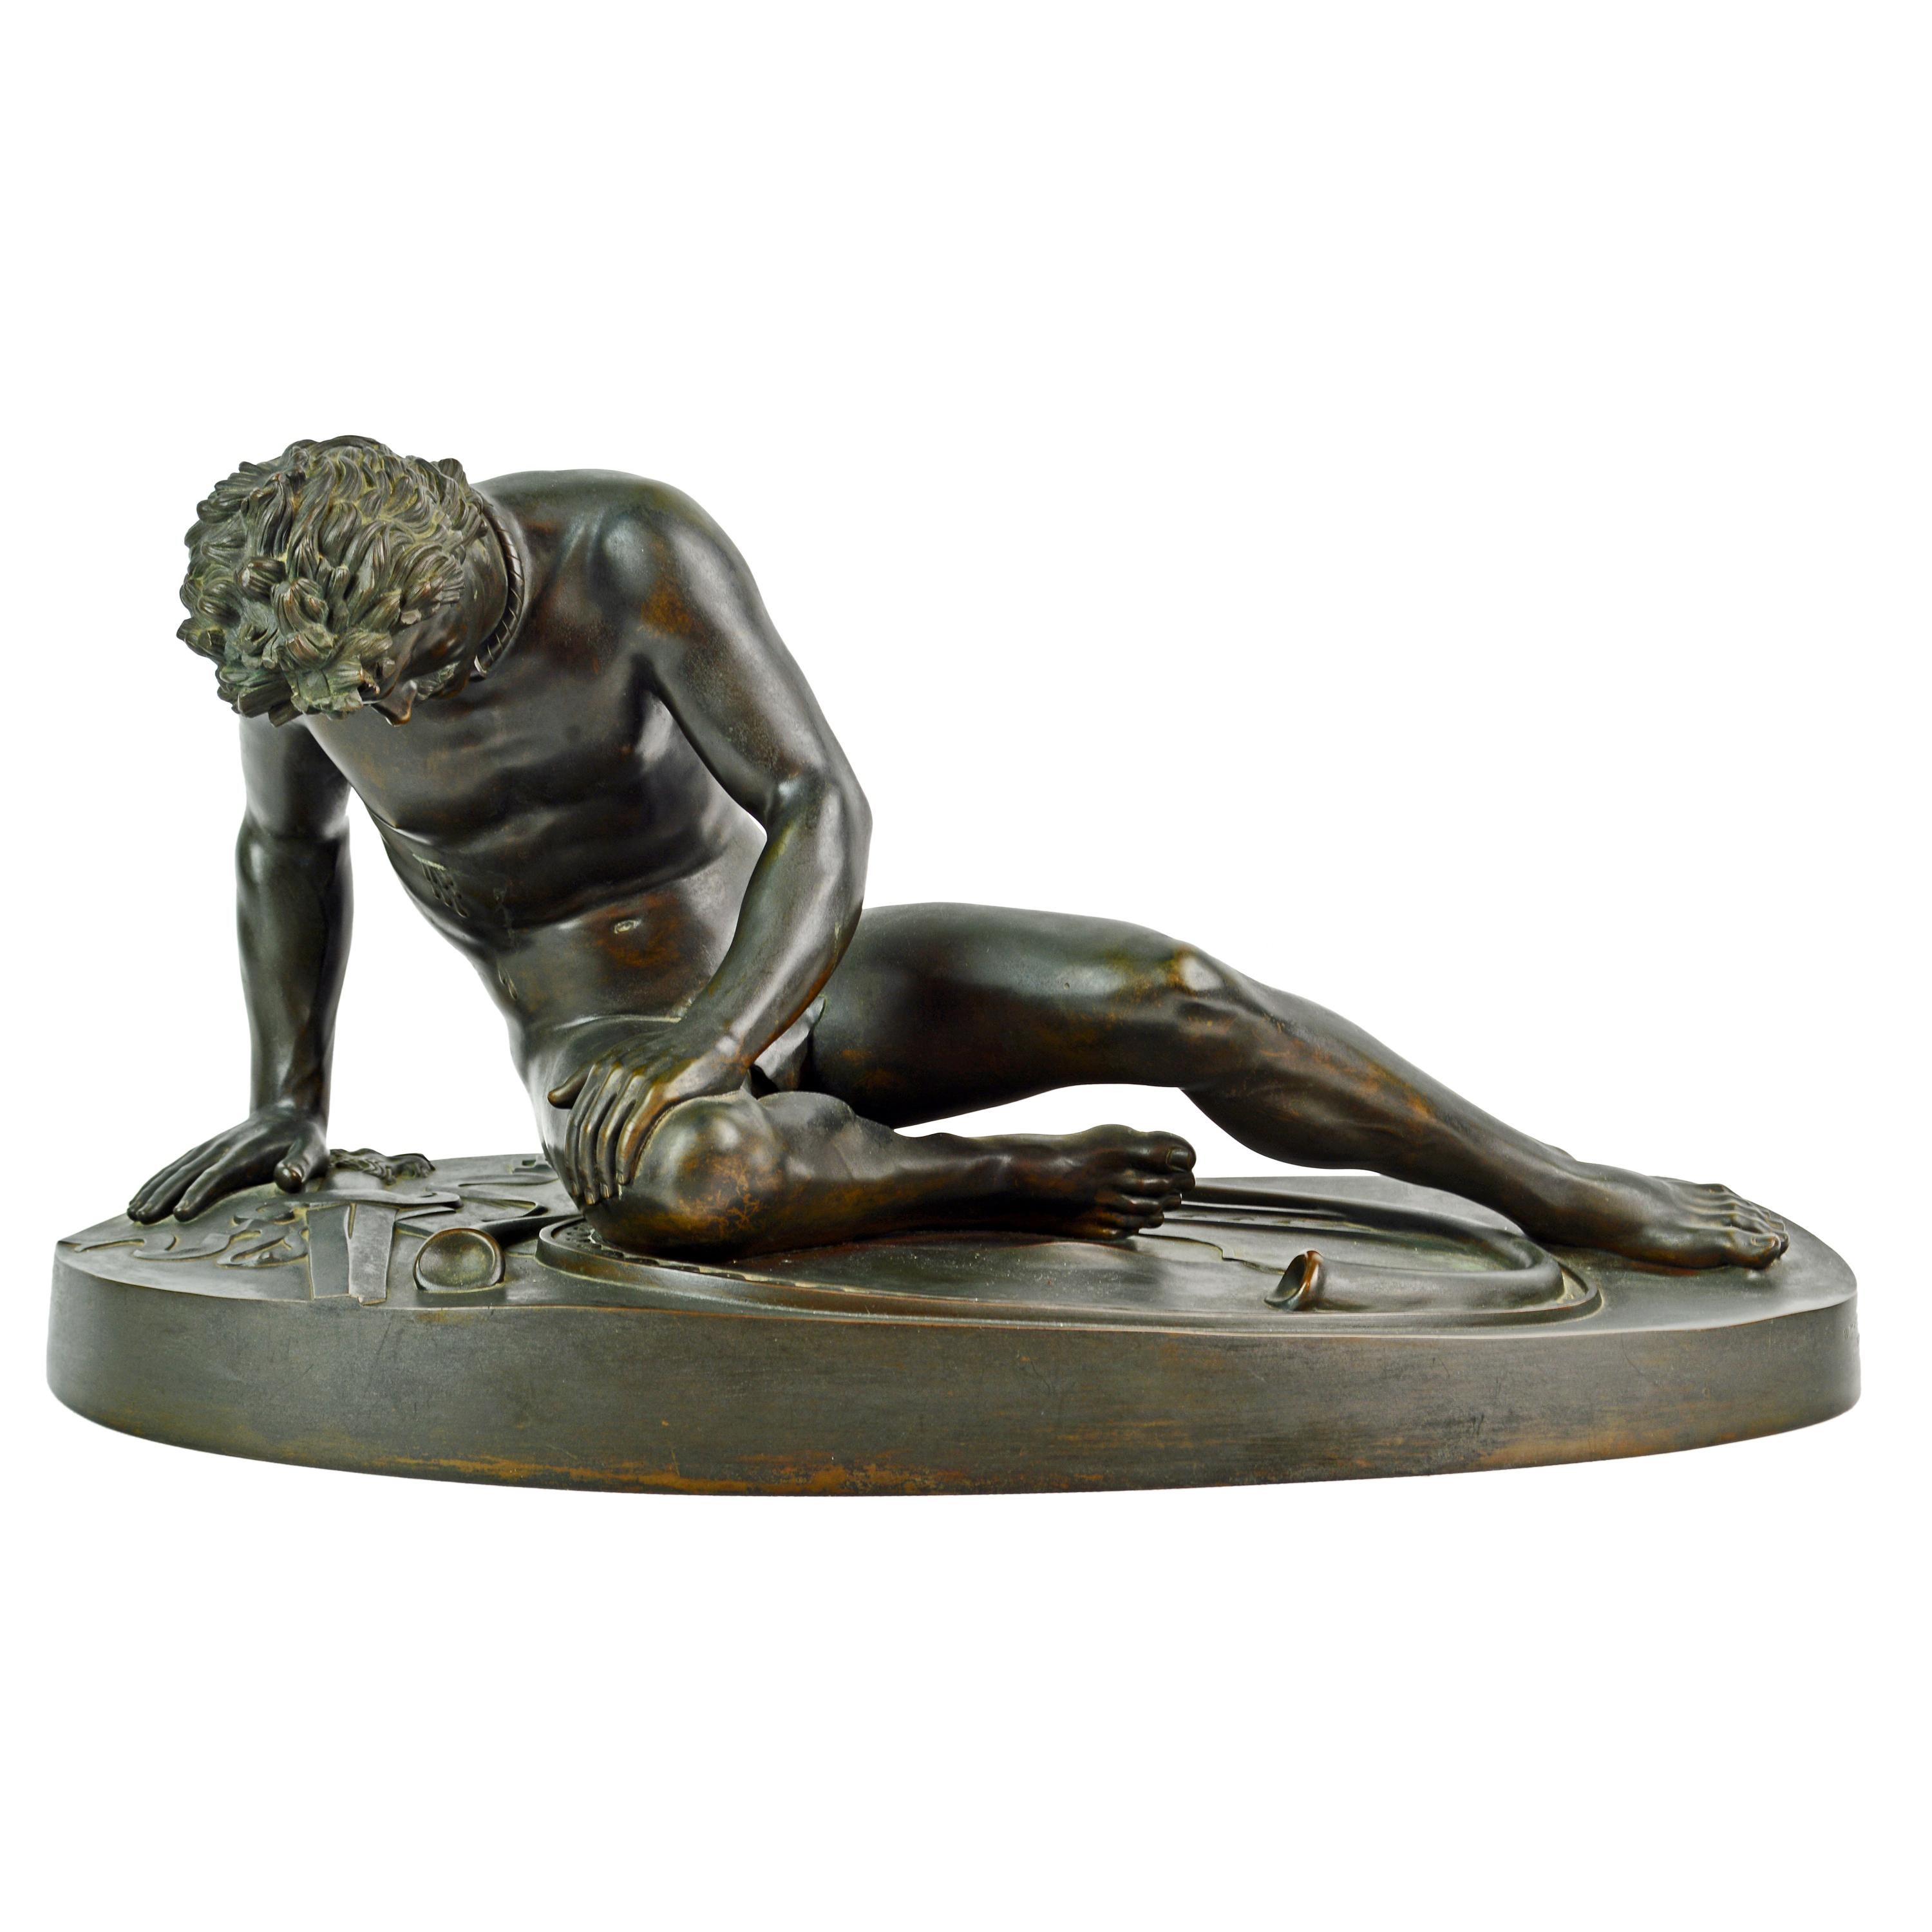 28 inches long and 12 inches tall this mid-19th century patinated bronze statue of the Dying Gaul by Benedetto Boschetti (1820-1870) after the antique is an impressive sight. The Dying Gaul is an Ancient Roman marble copy of a lost Hellenistic